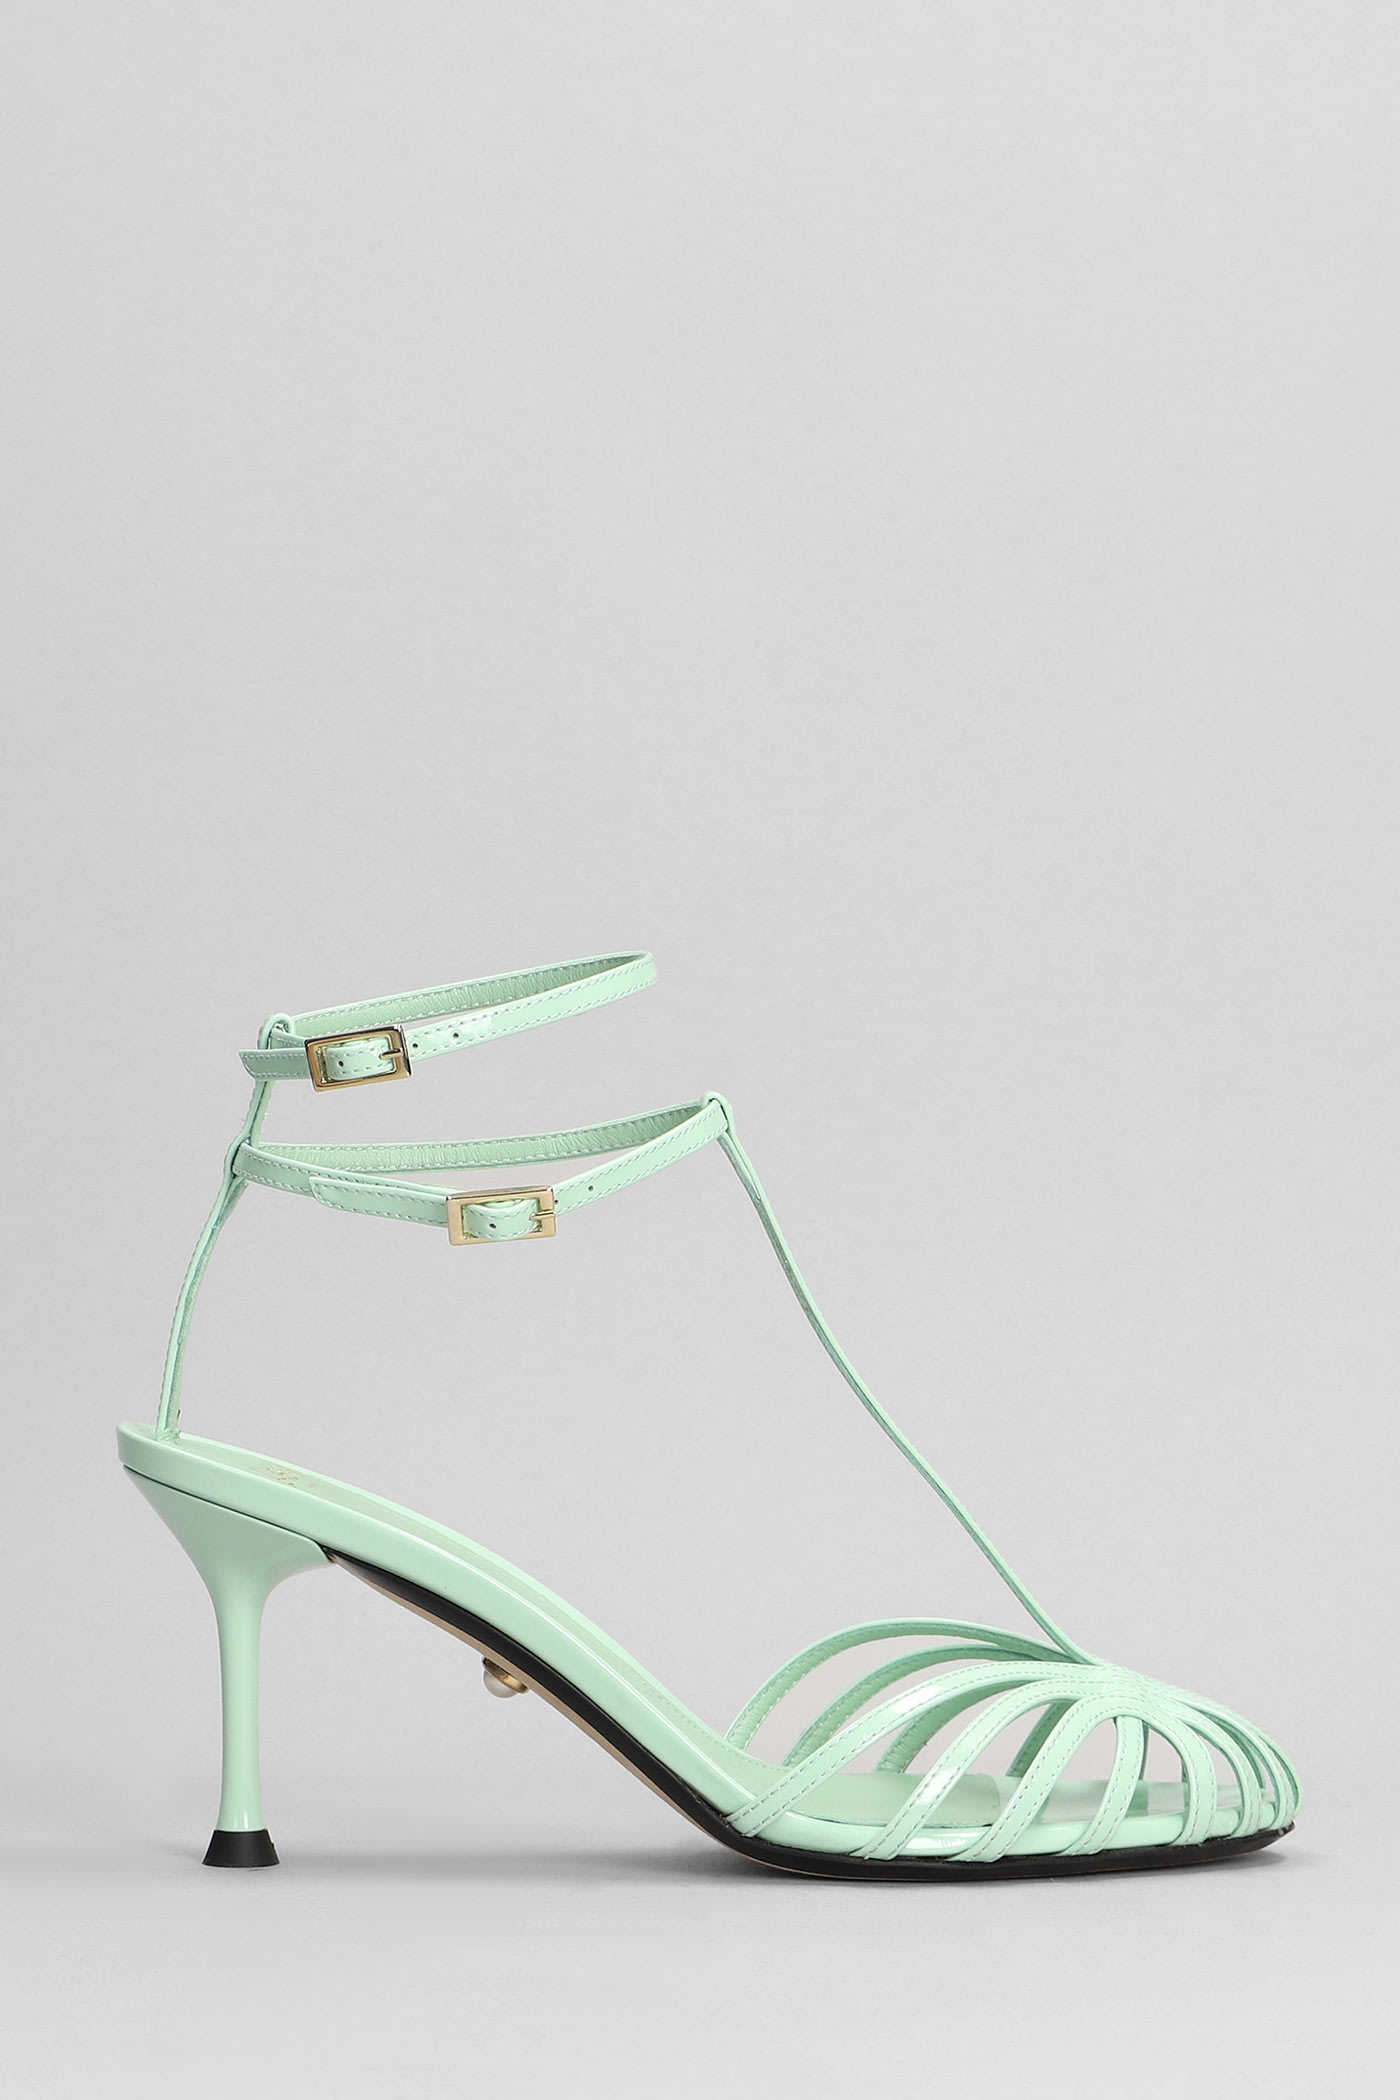 Jessie 075 Sandals In Green Patent Leather